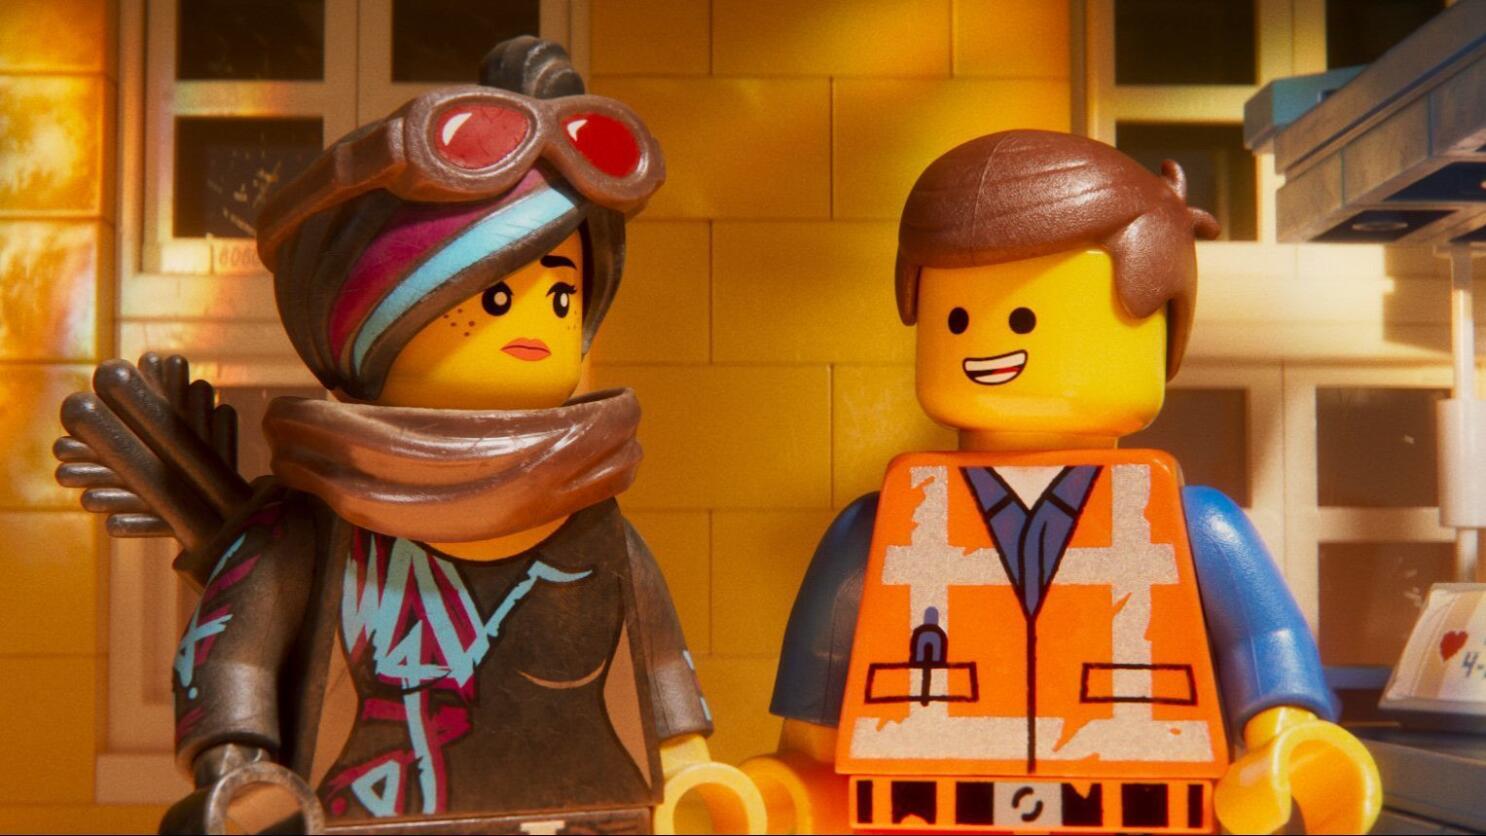 Review: 'The Lego Movie 2' is funny but falls short of the first